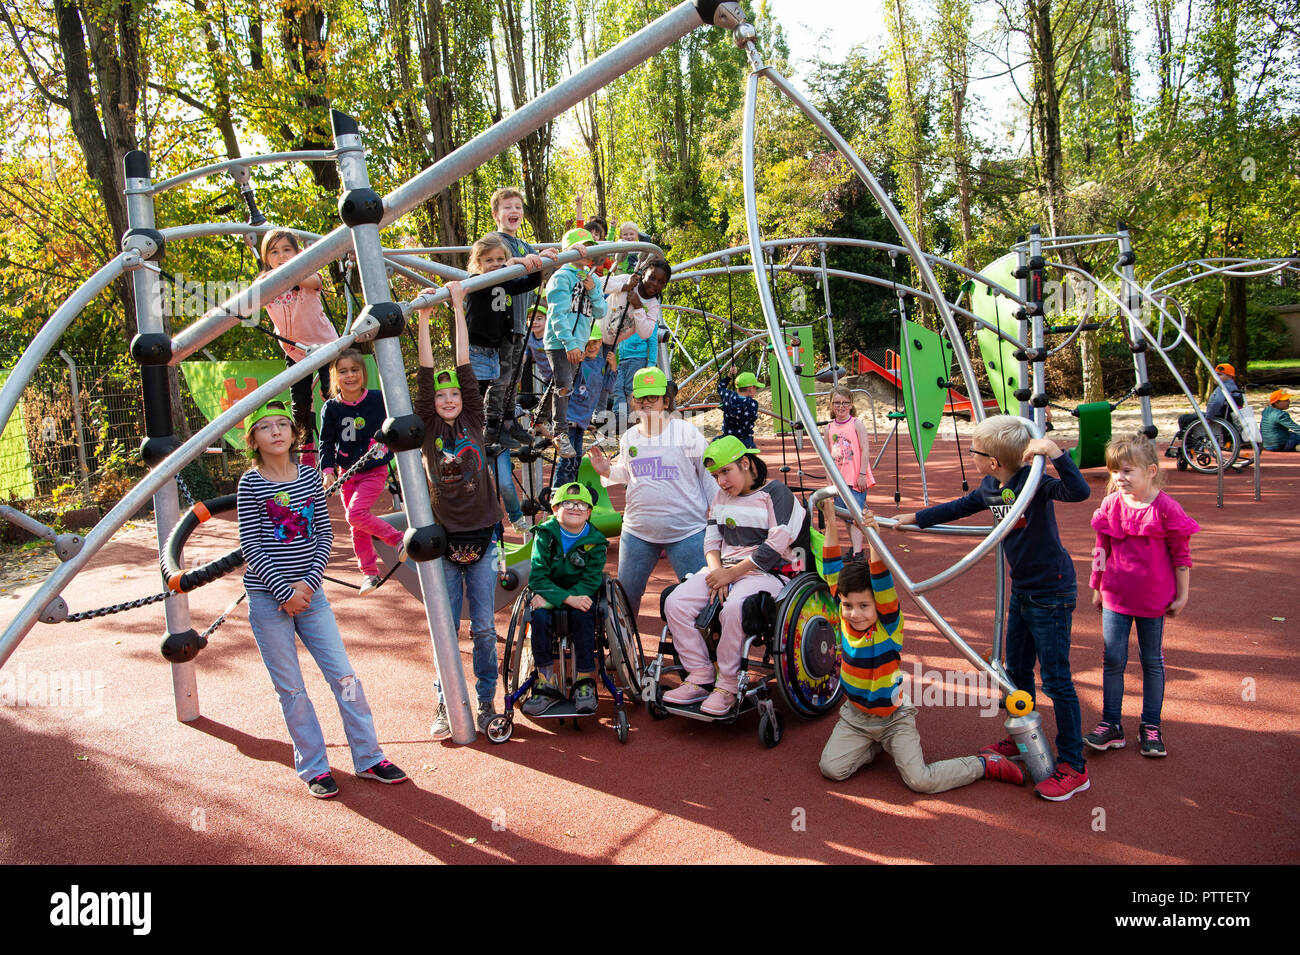 11 October 2018, North Rhine-Westphalia, Duisburg: Children stand together  for a group photo on a barrier-free playground that was opened in the  Marxloh district. Photo: Christophe Gateau/dpa Stock Photo - Alamy